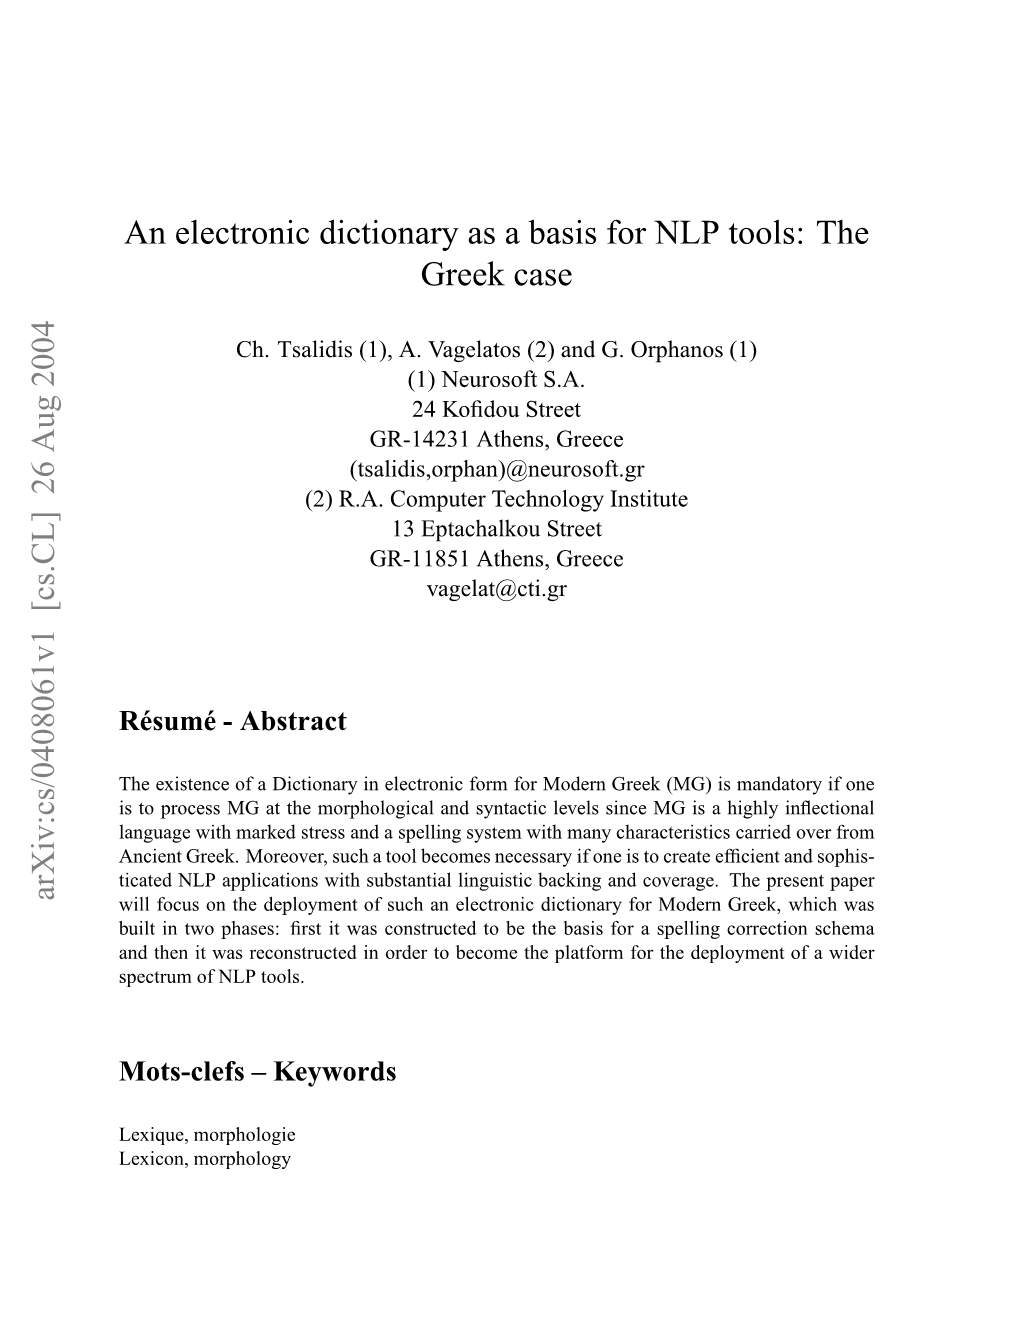 An Electronic Dictionary As a Basis for NLP Tools: the Greek Case Memory